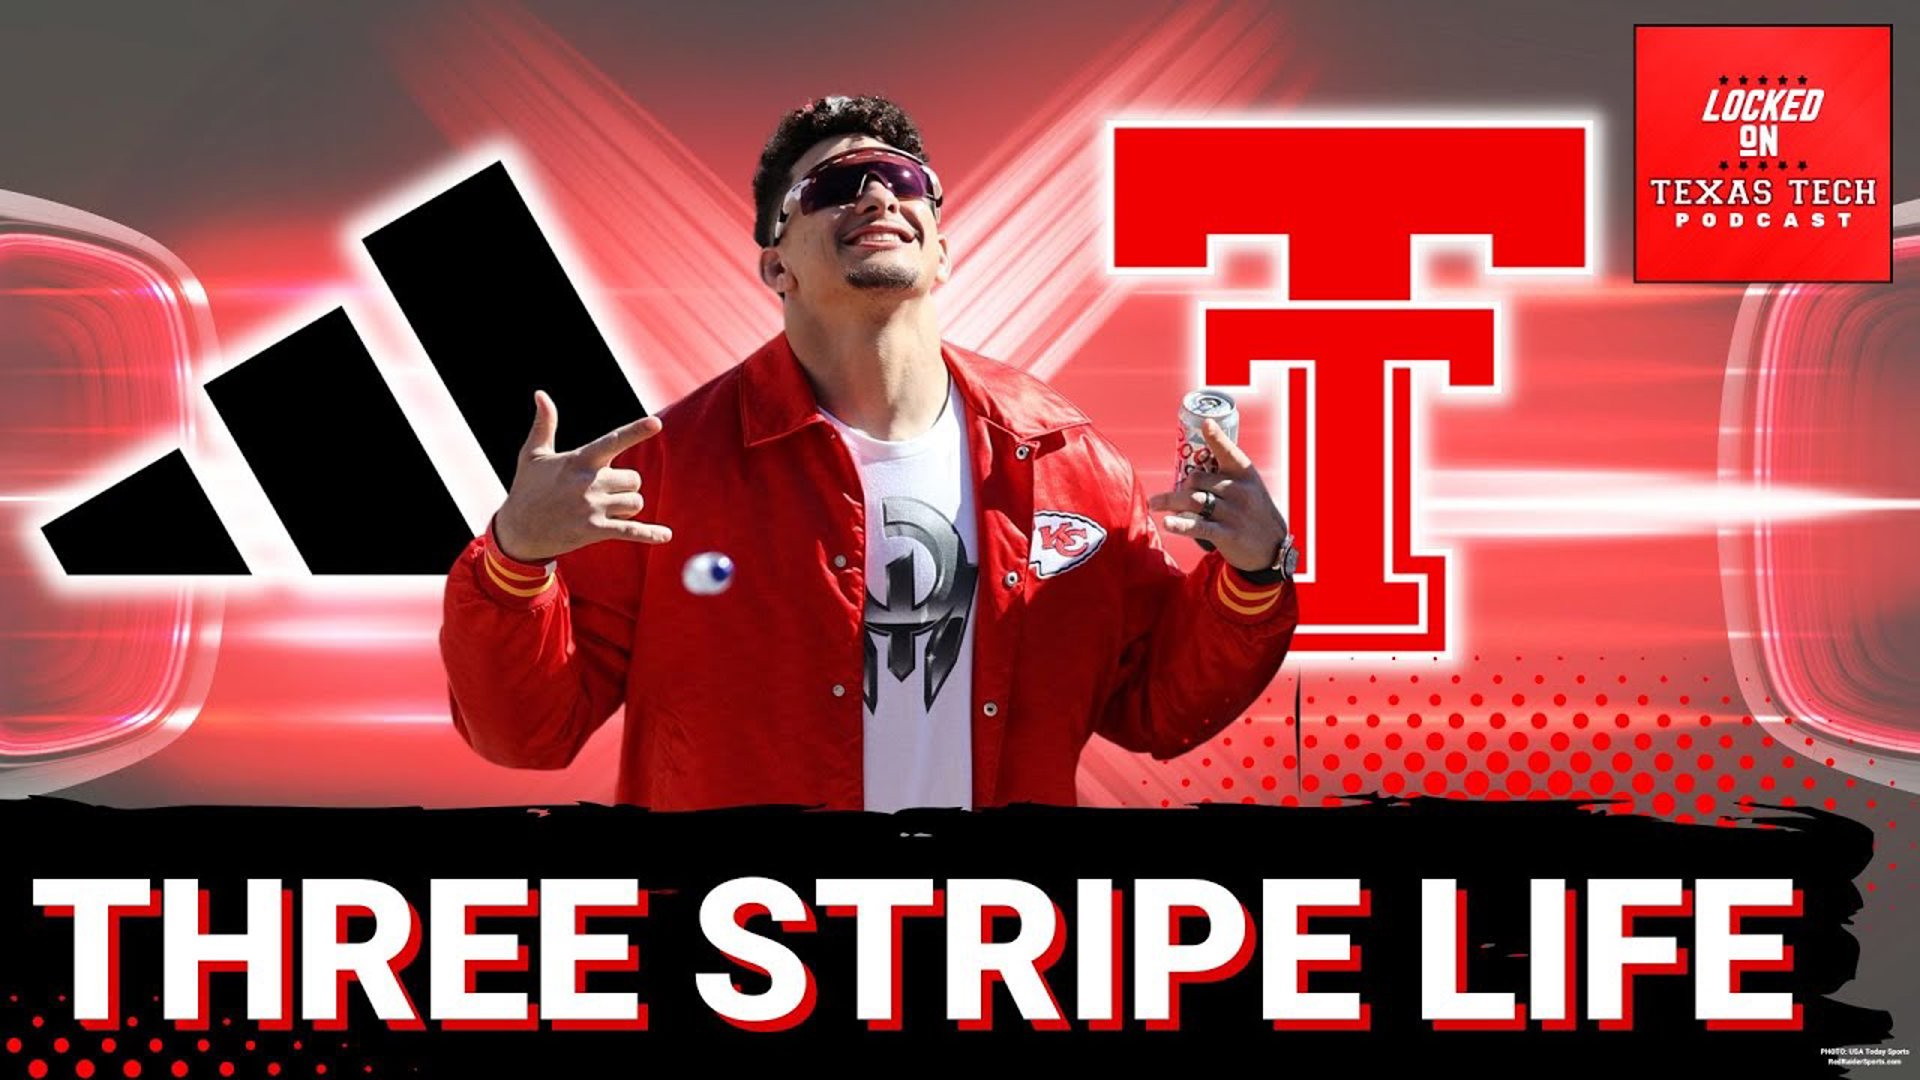 Today from Lubbock, TX, on Locked On Texas Tech:

- three stripe life in LBK
- years in the making?
- biggest payoff